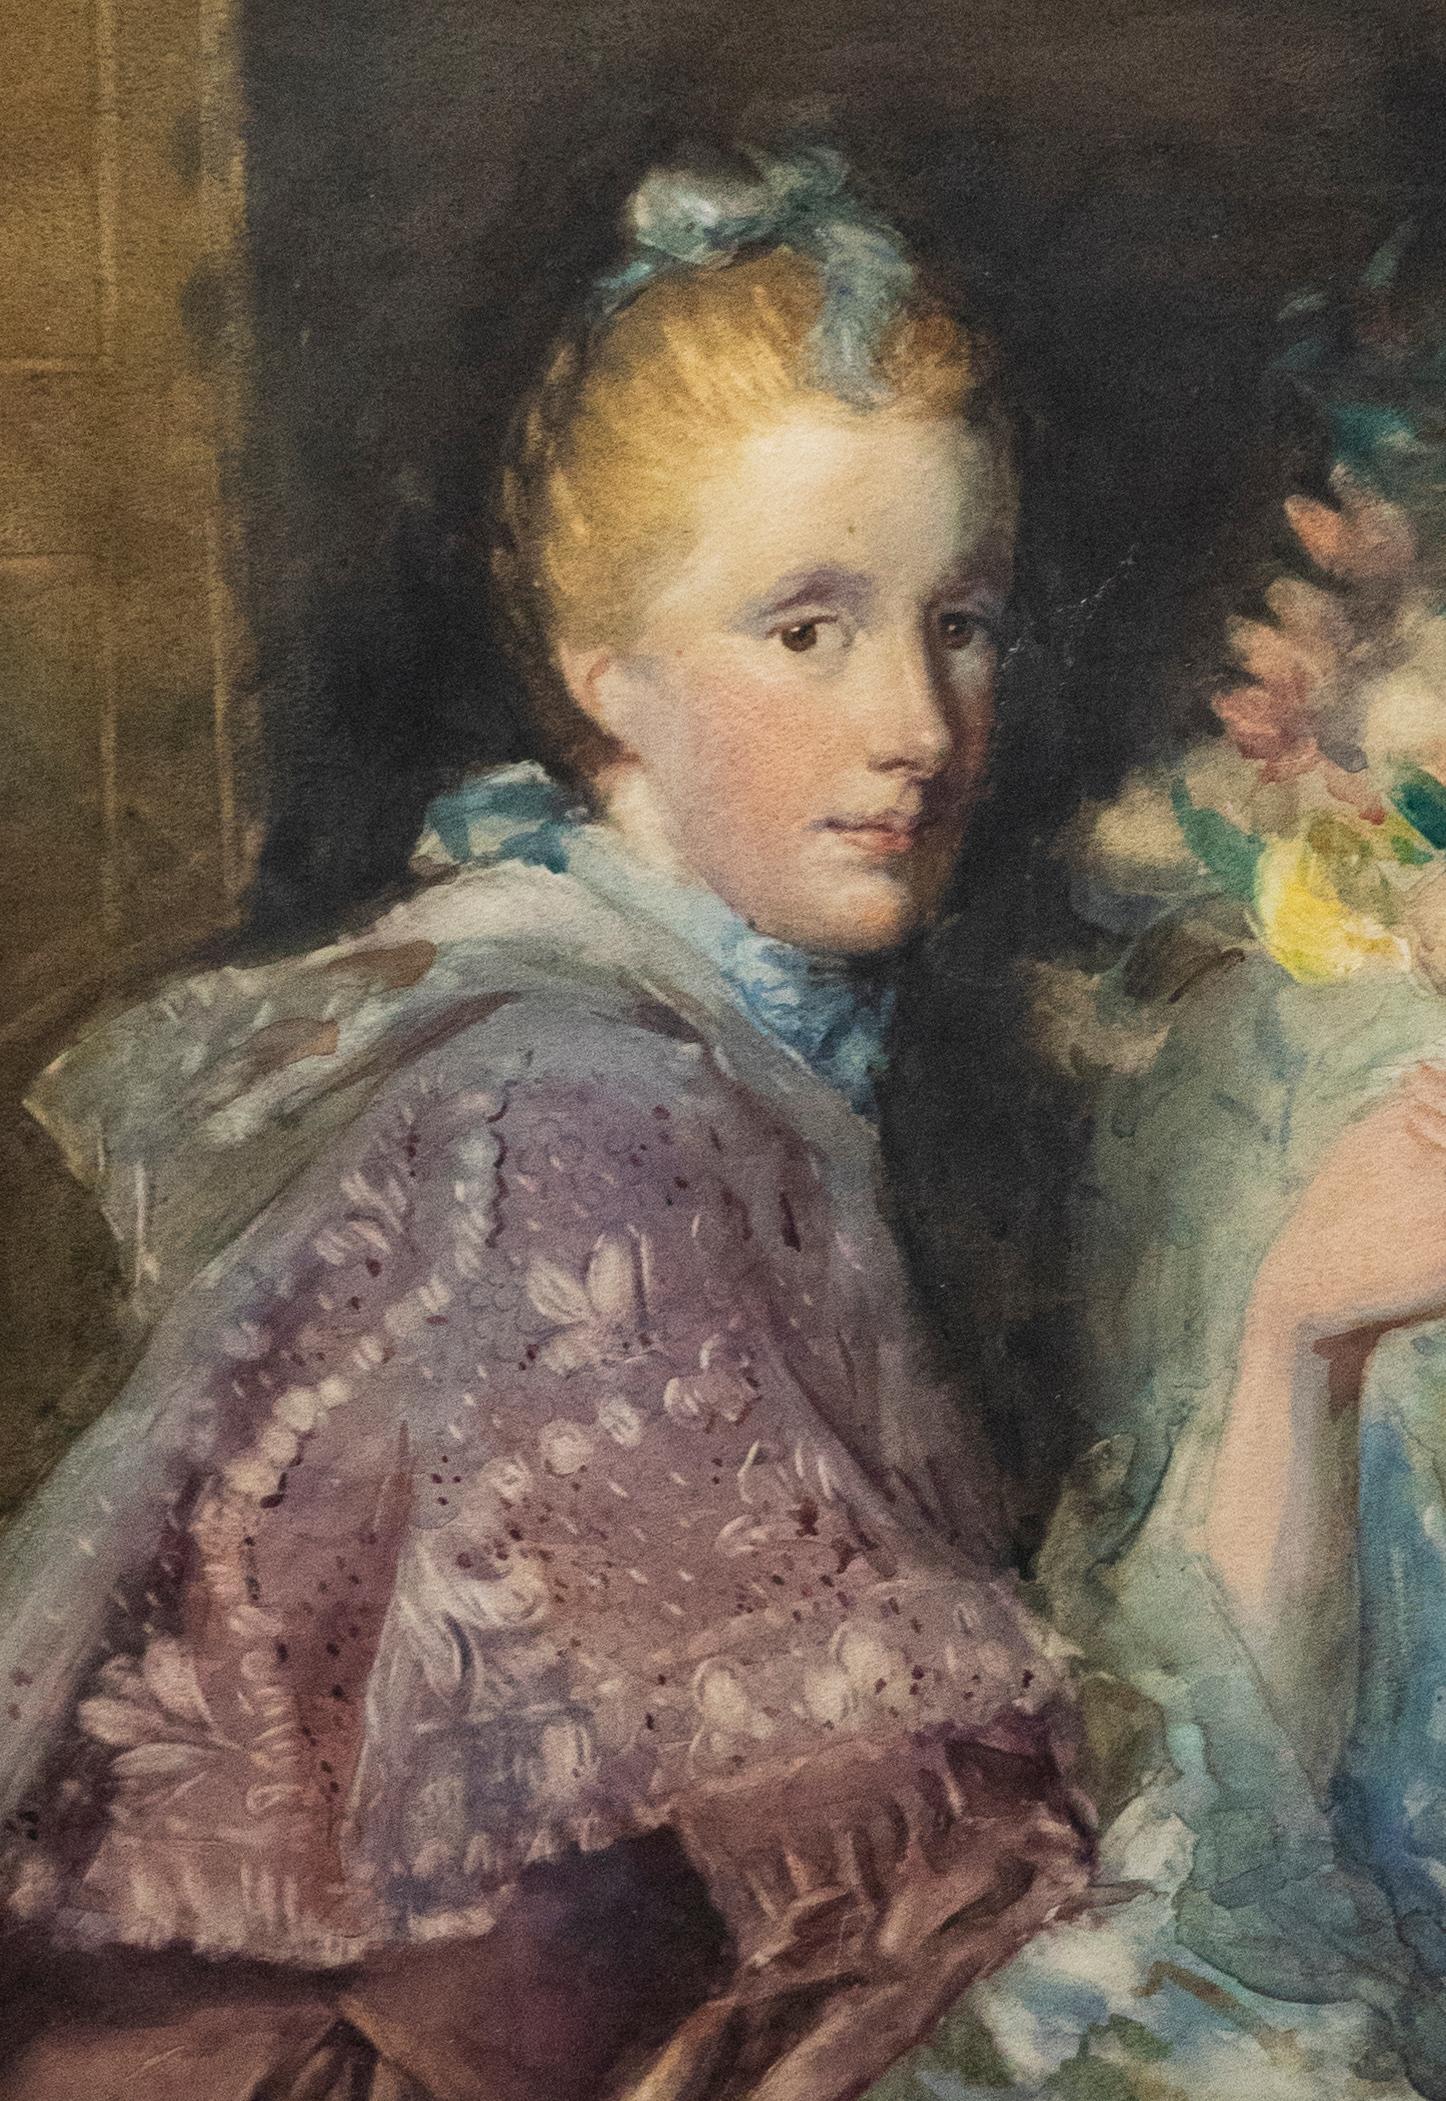 A charming watercolour study after Allan Ramsey. The portrait depicts Ramsay's first wife Margaret Lindsay Ramsay. She was a member of the Scottish Clan Murray and the eldest daughter of Sir Alexander Lindsay of Evelick. Unsigned. Presented in a